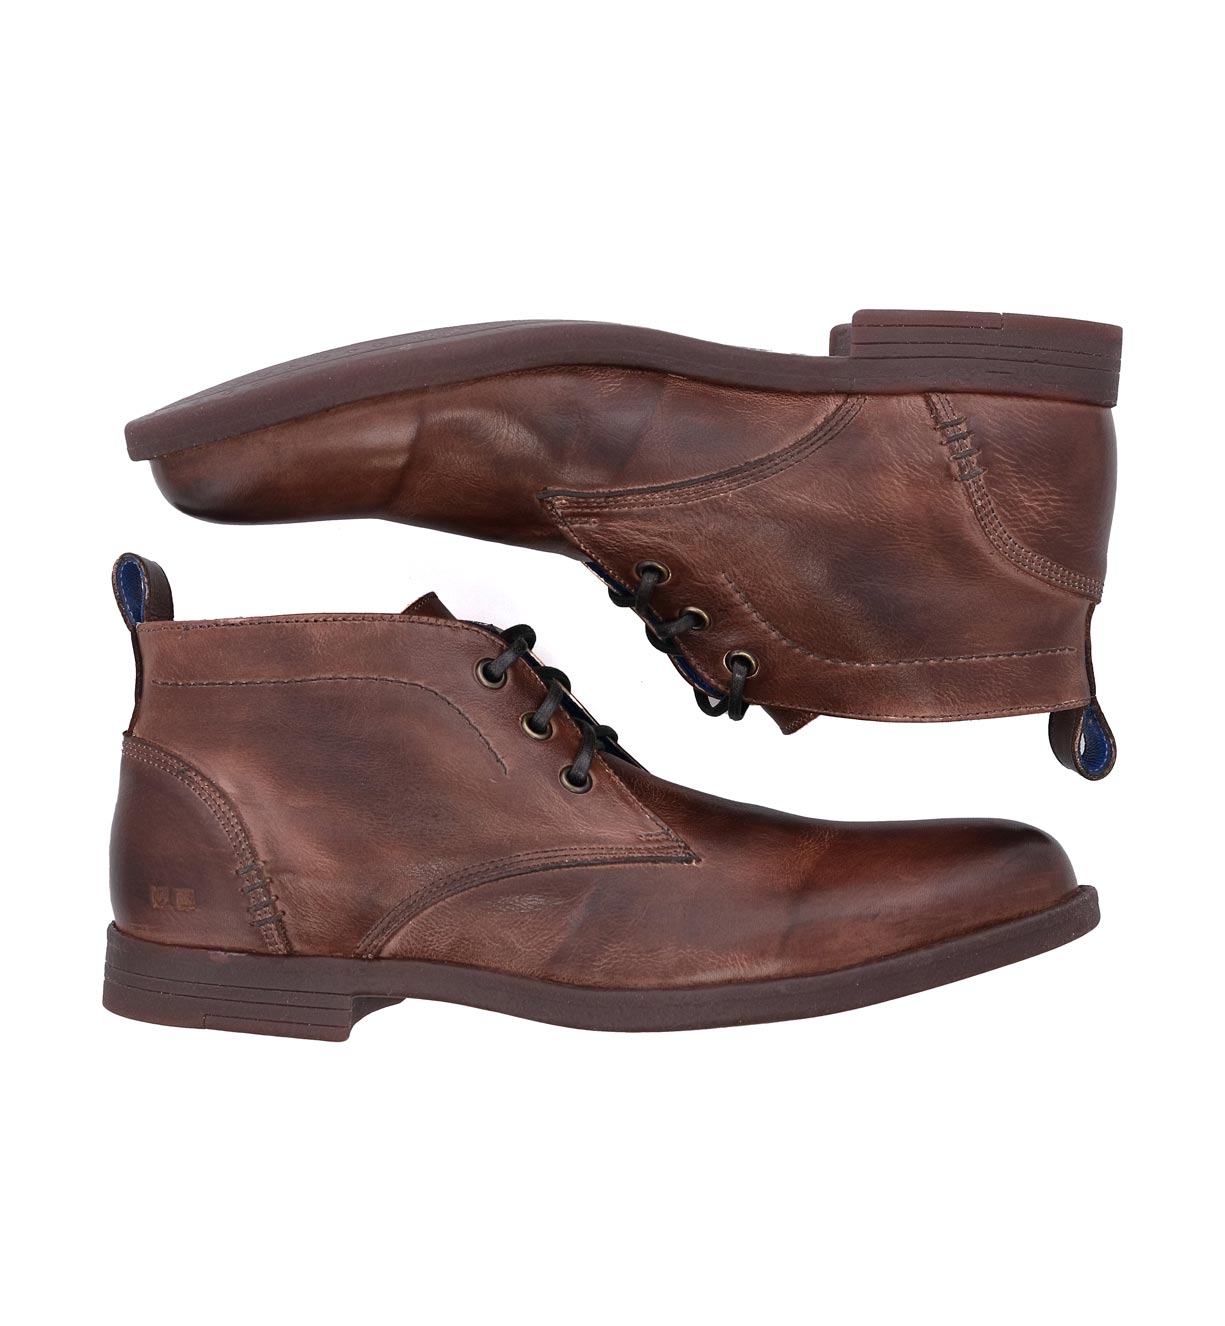 A pair of Bed Stu Illiad men's brown vegetable-tanned leather lace-up boots, displayed with one boot slightly above the other against a white background.